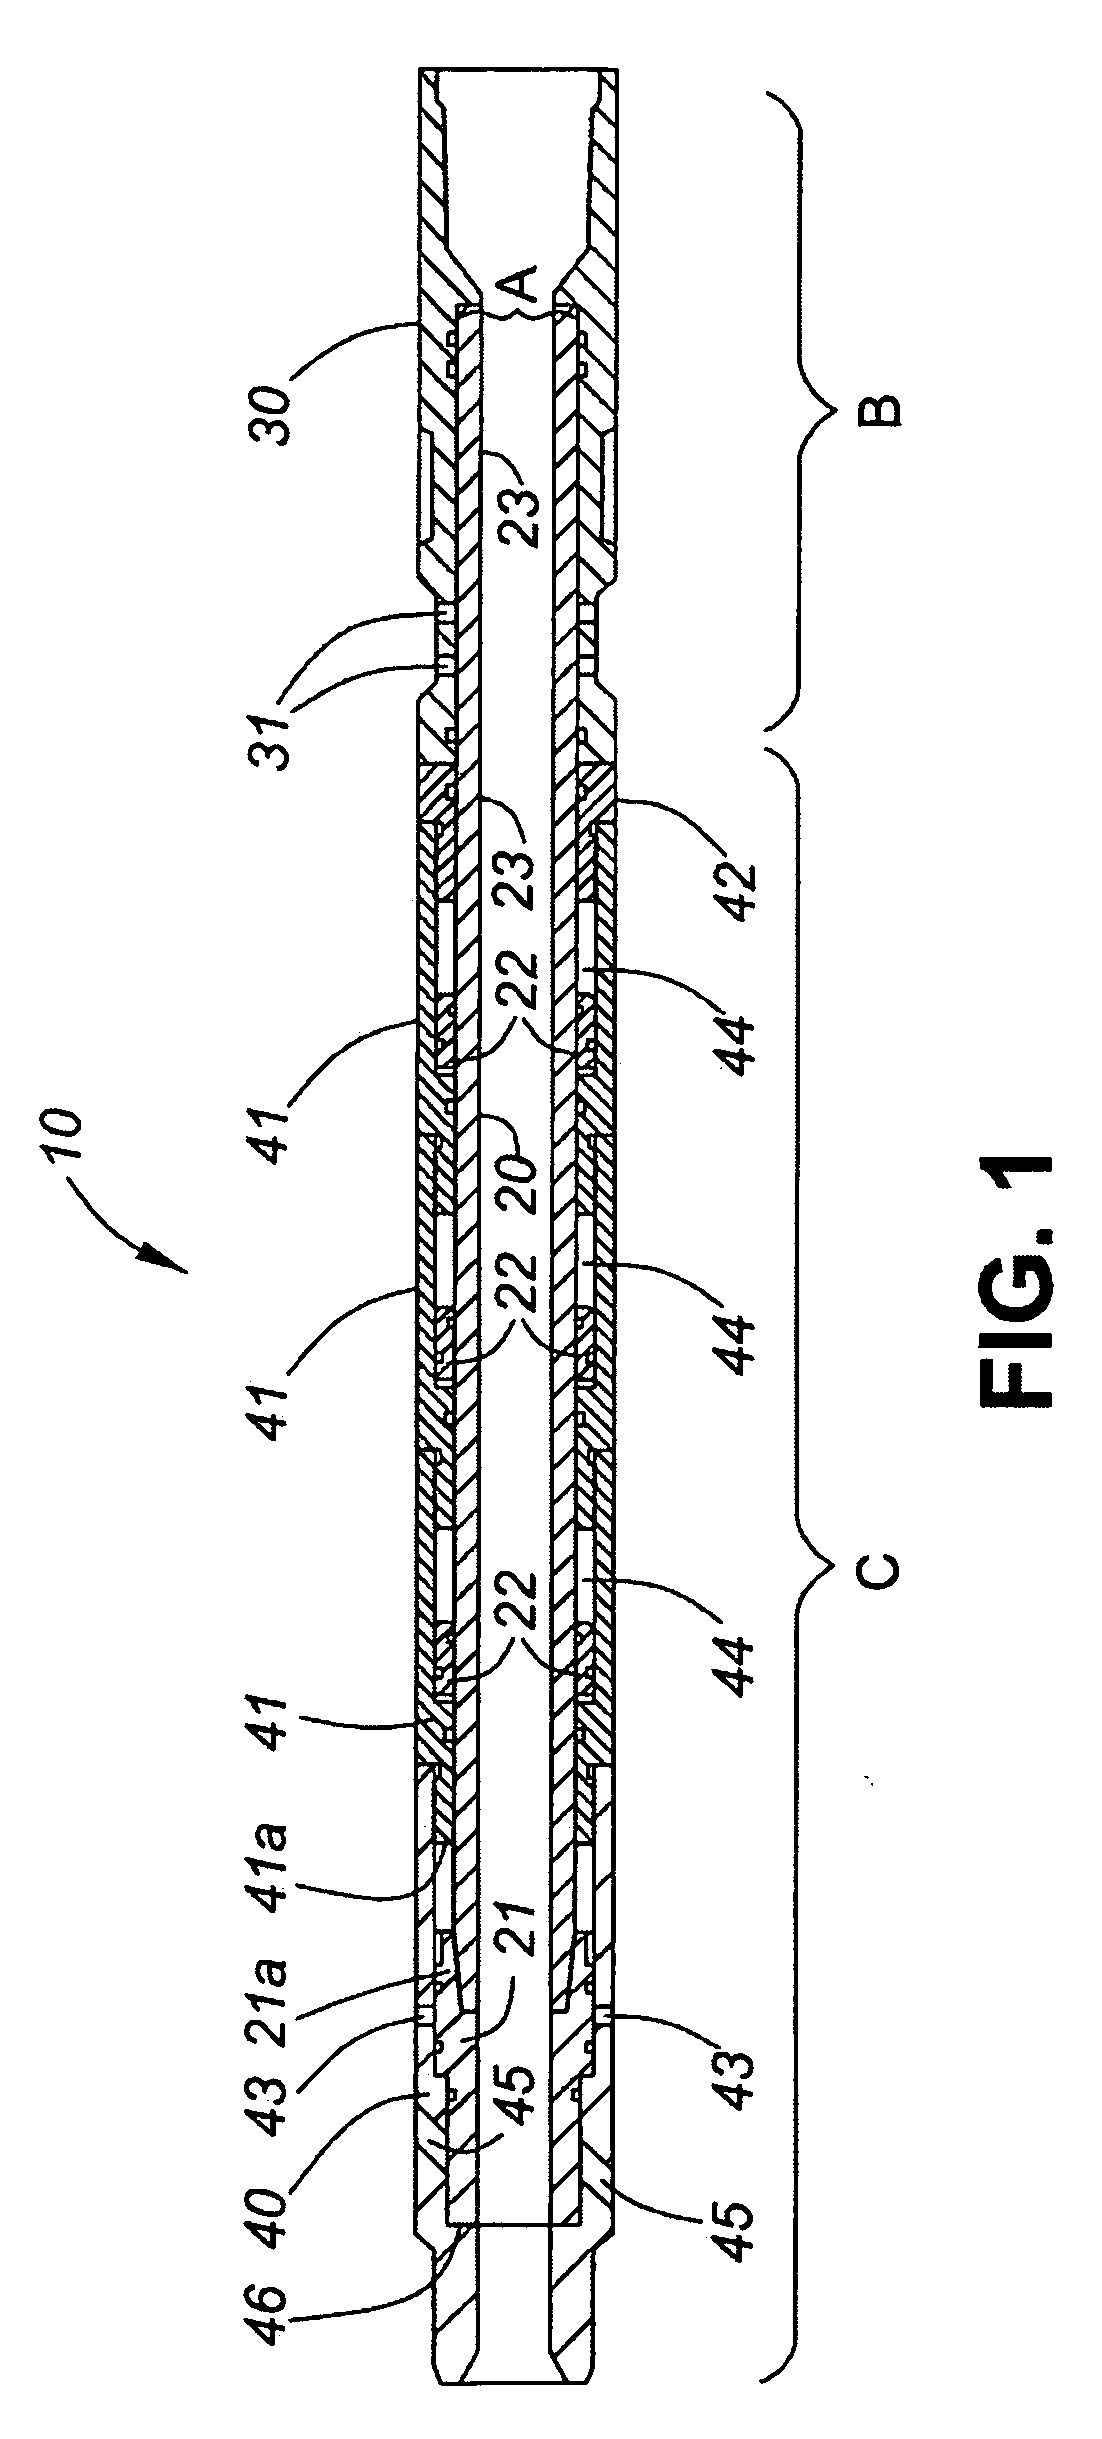 Staged Actuation Shear Sub for Use Downhole